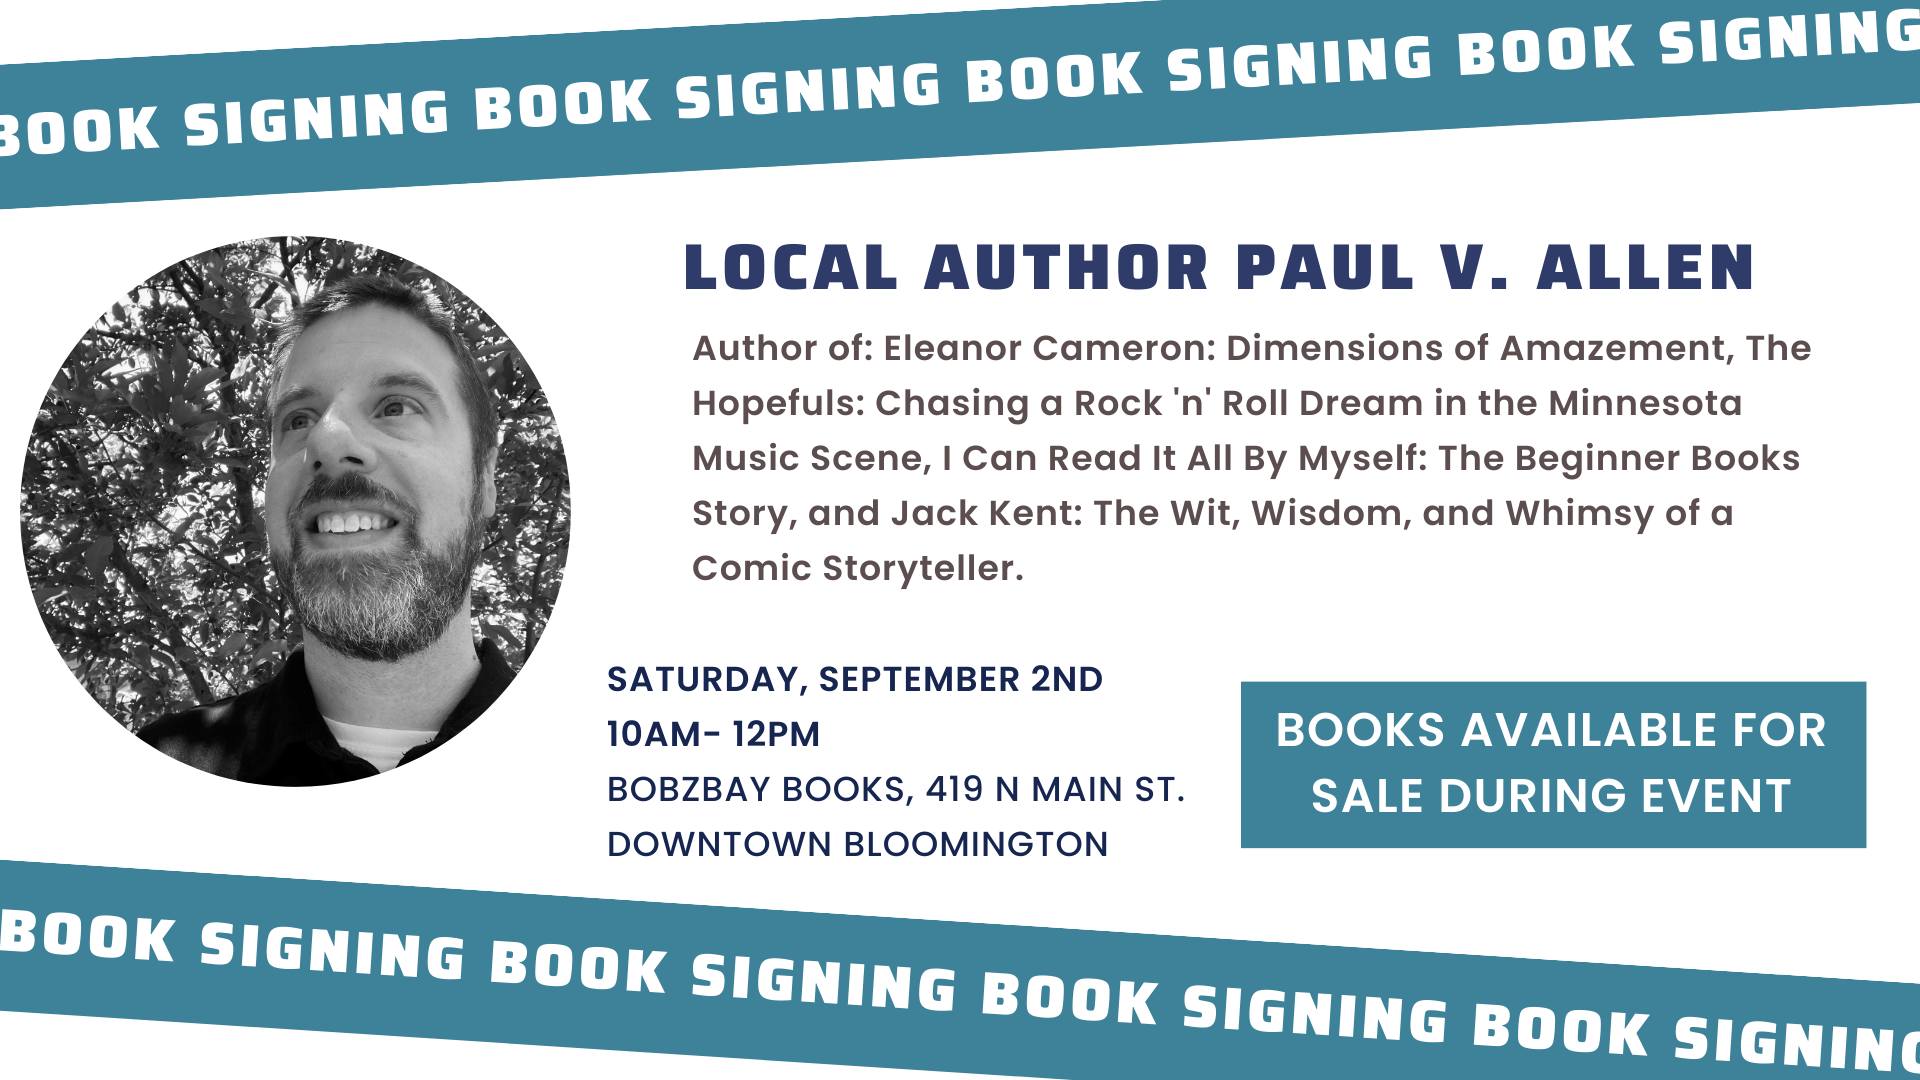 Local Author Paul V. Allen Book Signing at Bobzbay Books